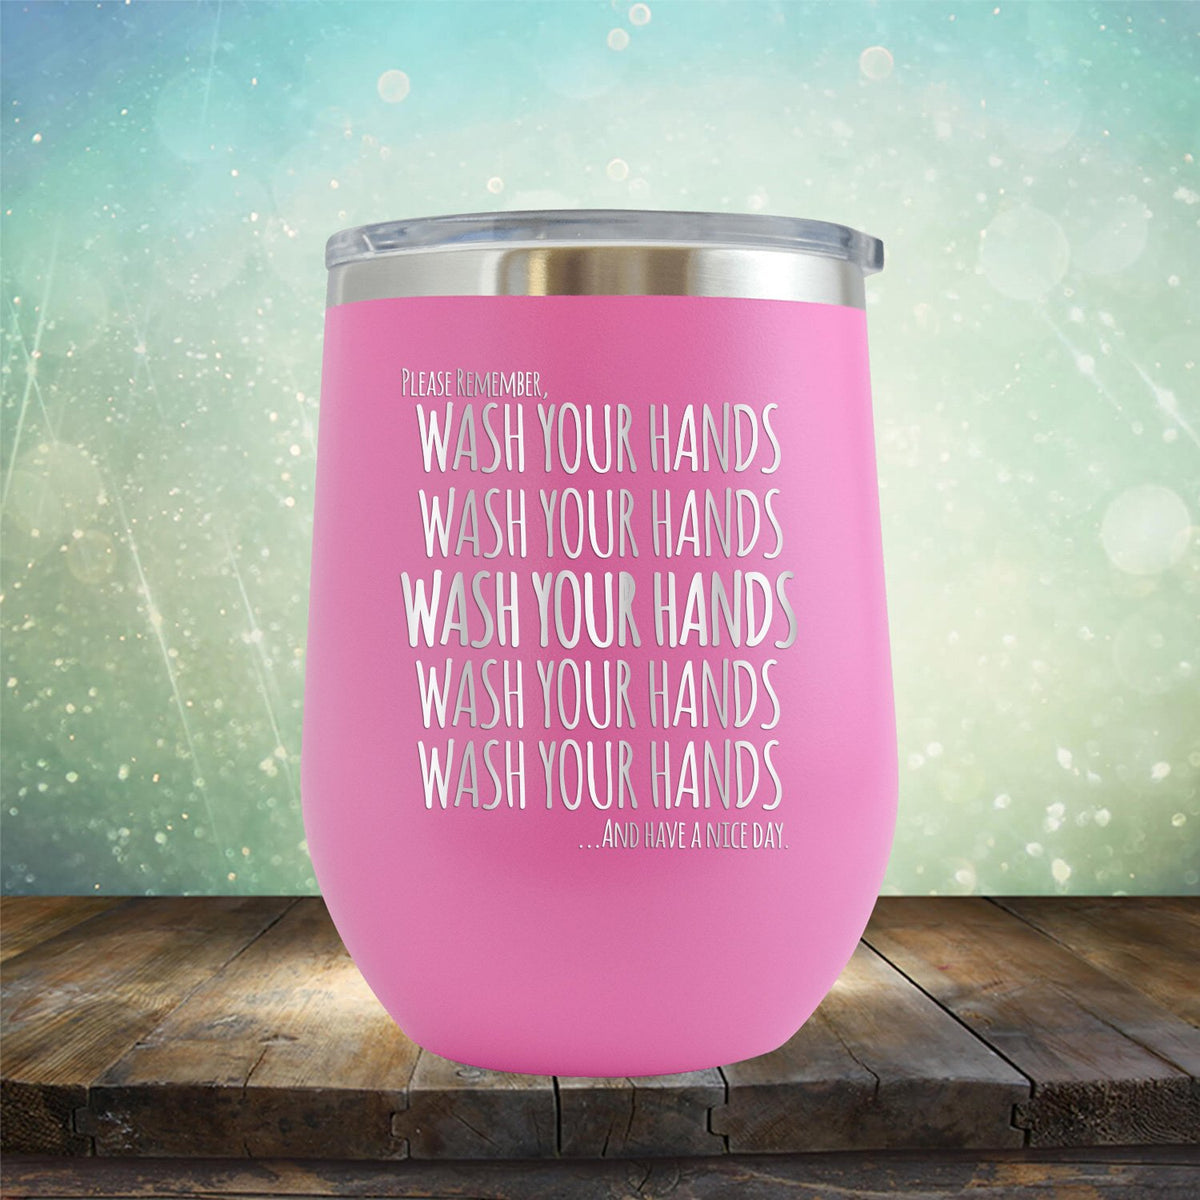 Wash Your Hands and Have A Nice Day - Stemless Wine Cup